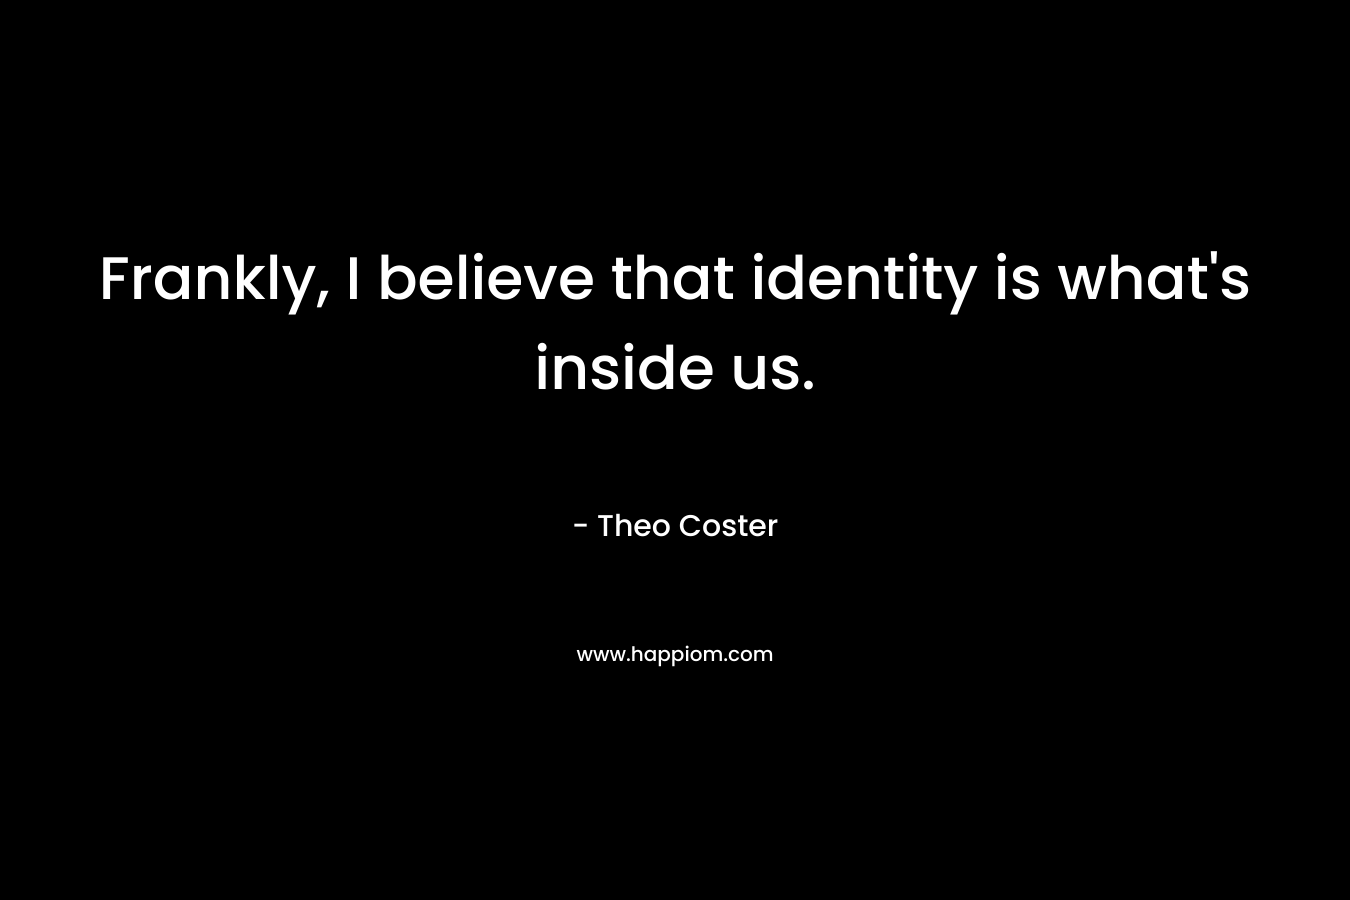 Frankly, I believe that identity is what's inside us.